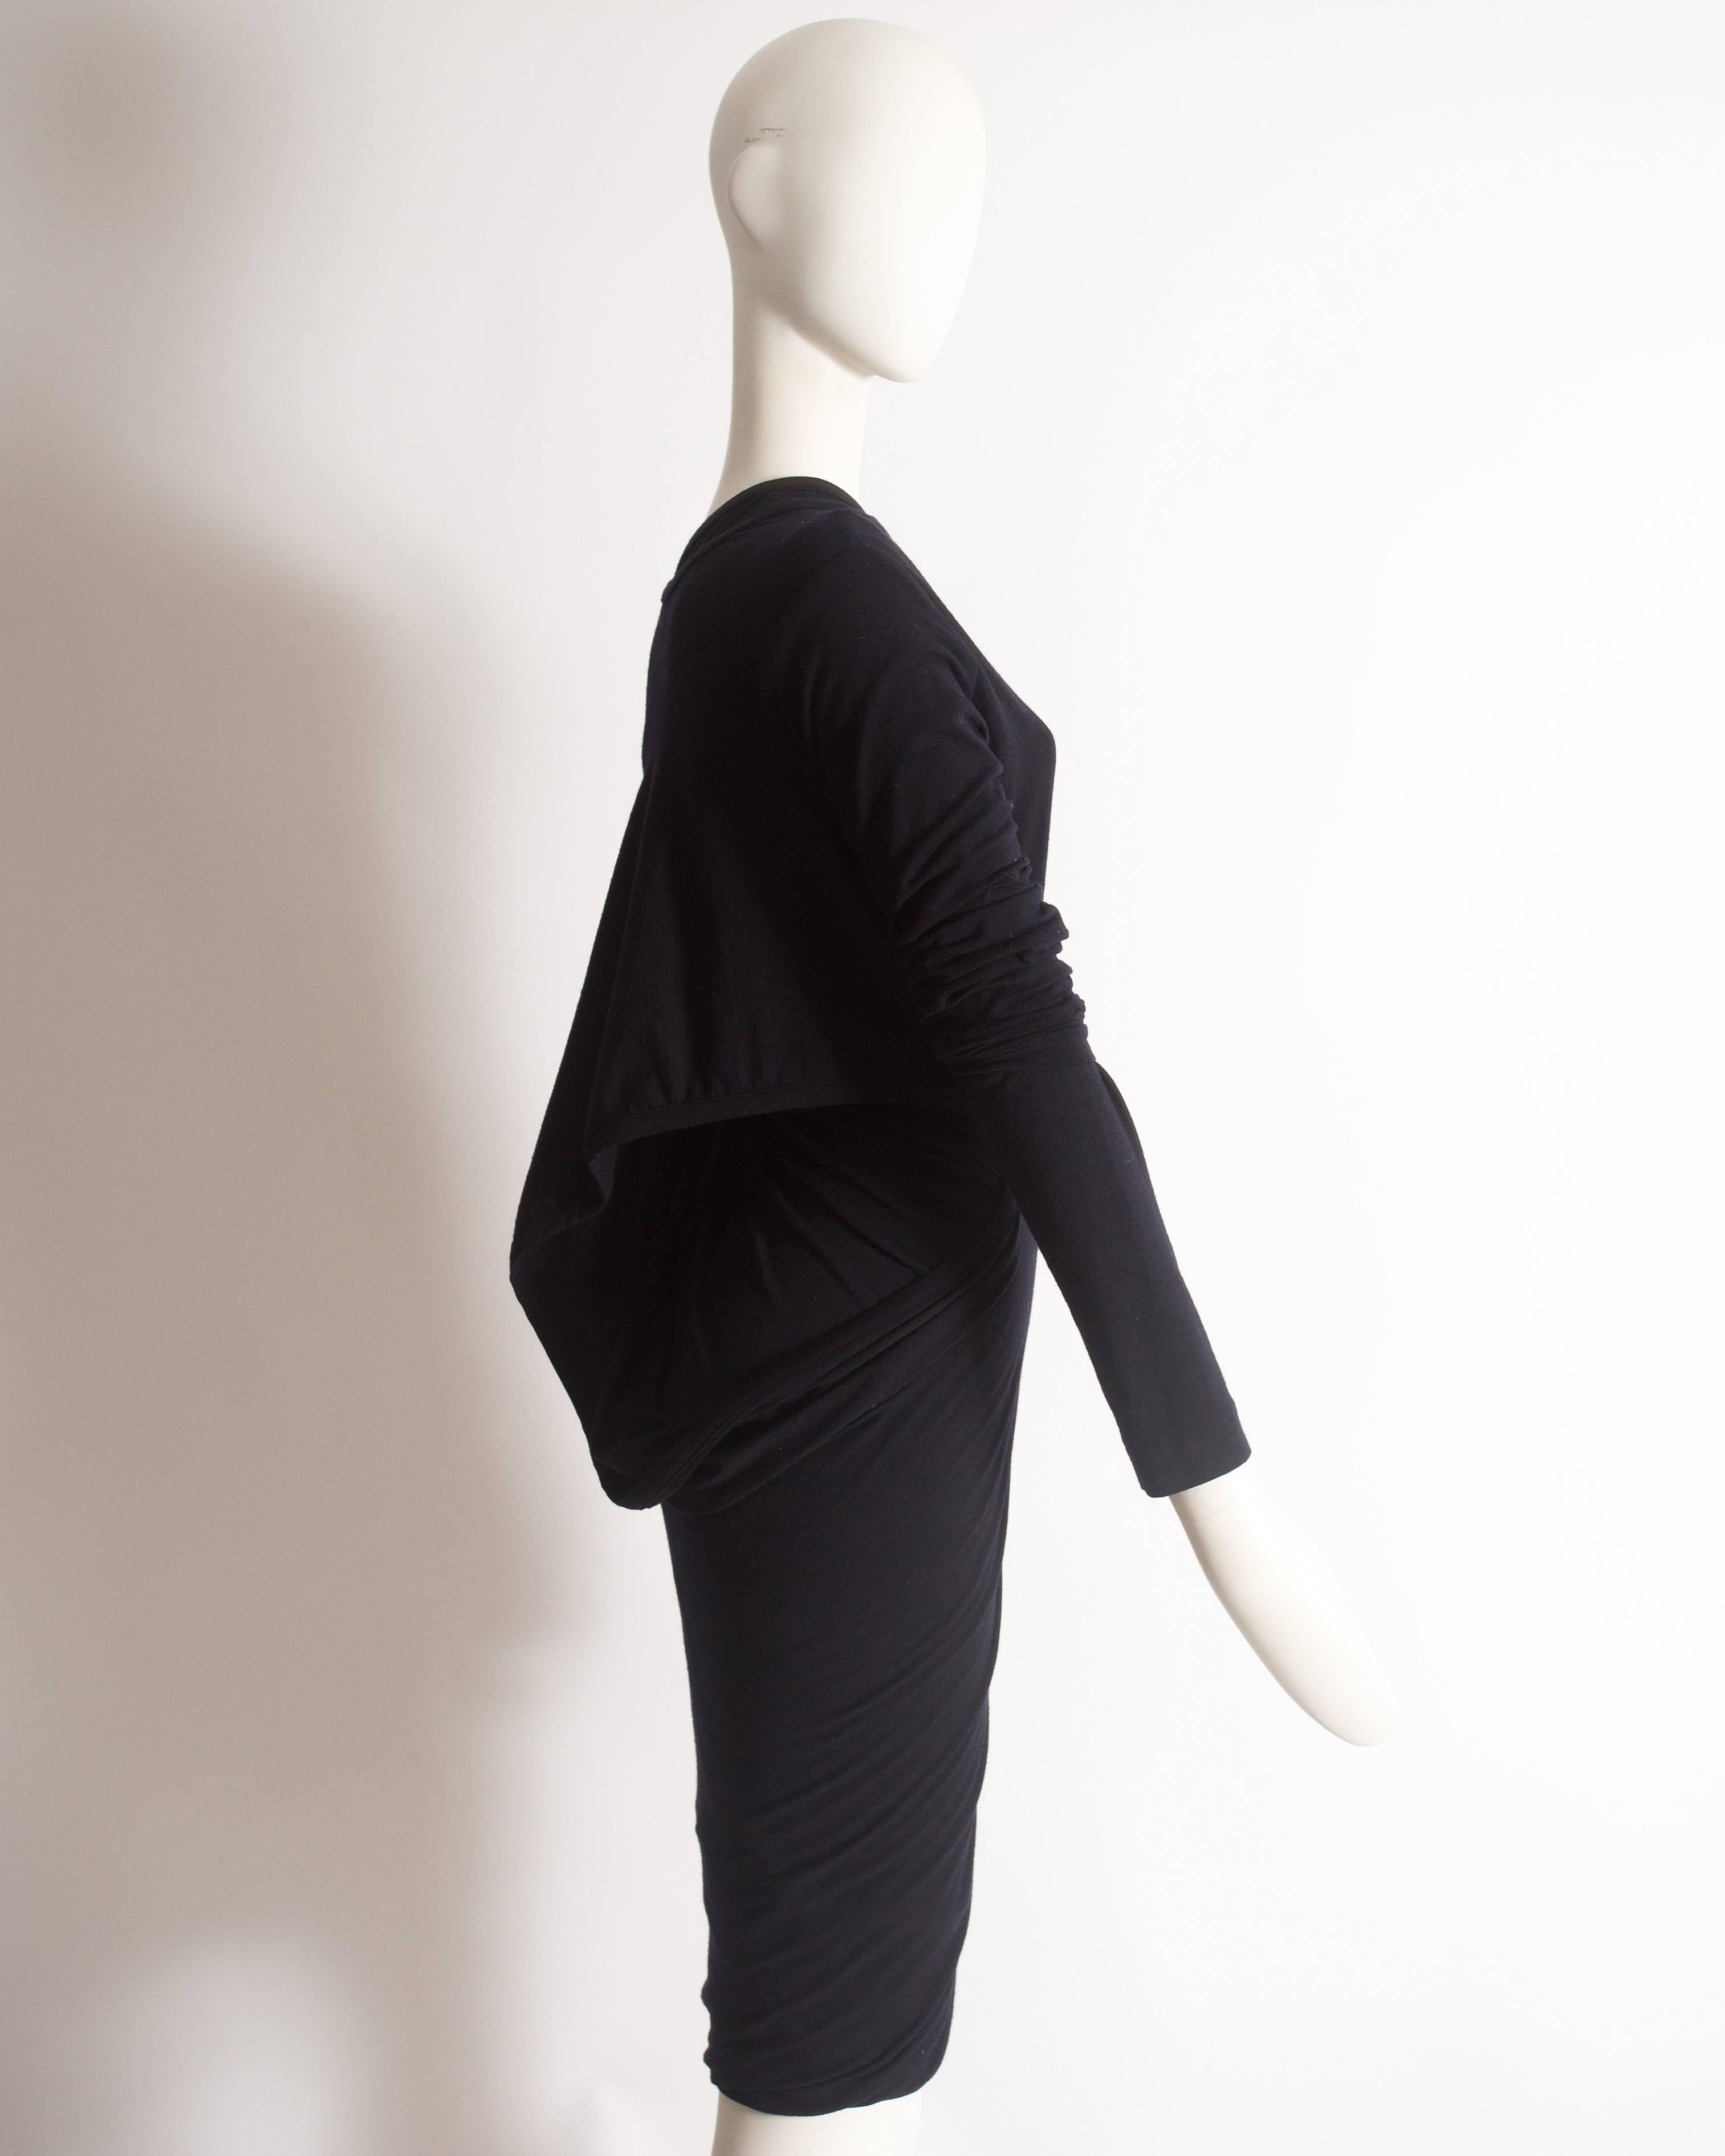 Comme des Garcons 'Punk Chic' black knitted dress, circa 1991 3